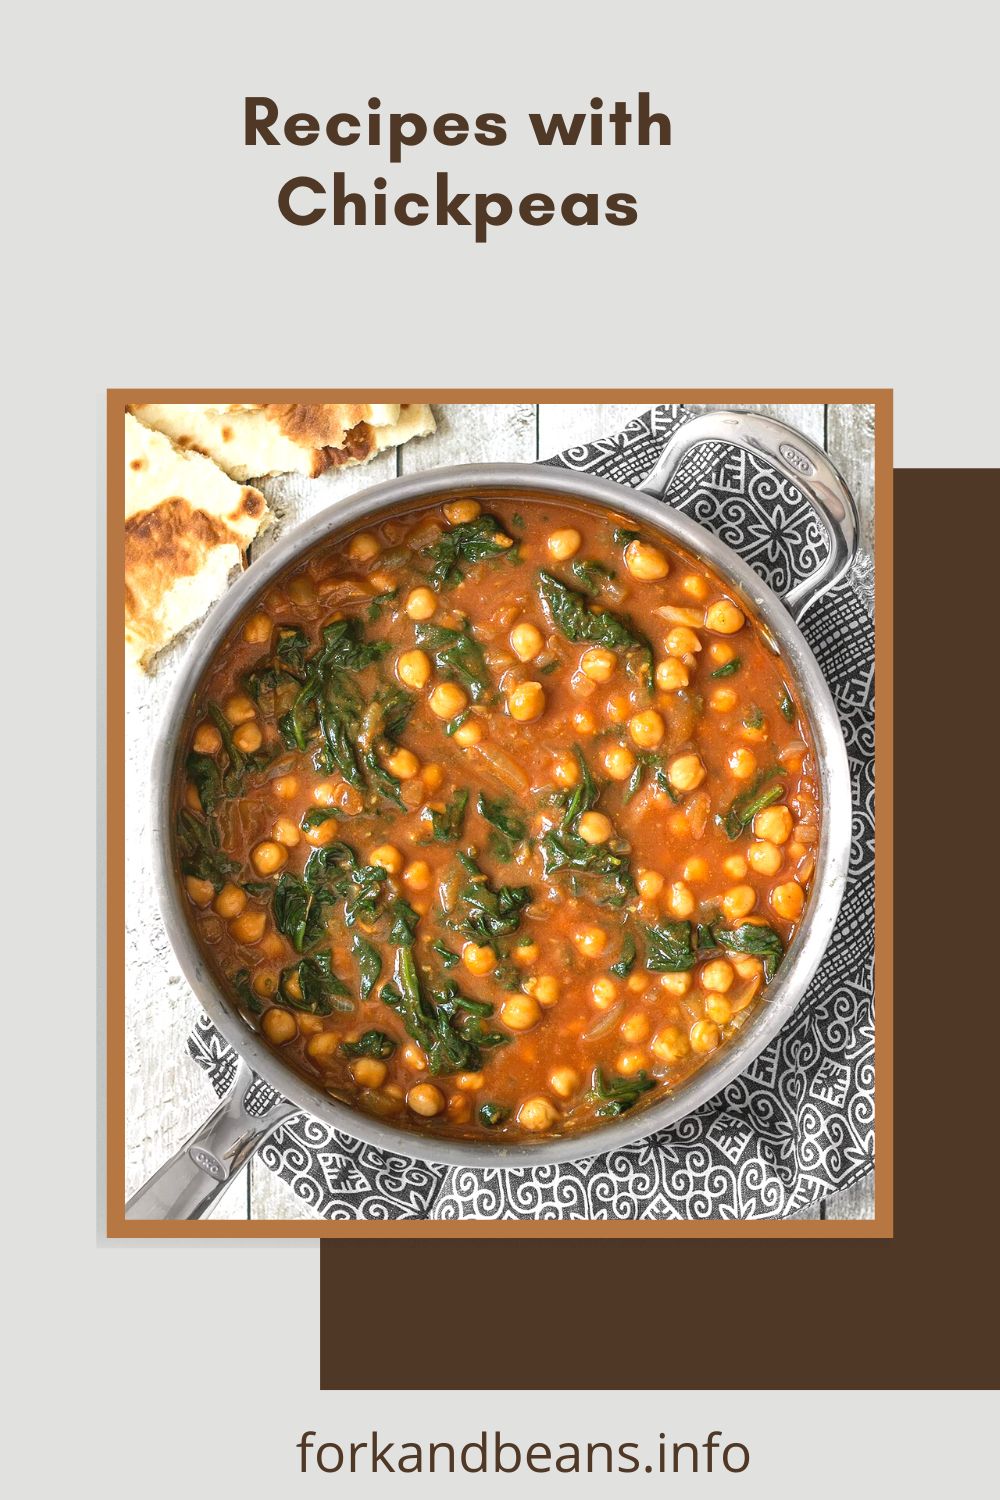 Recipe for Curried Chickpeas with Spinach